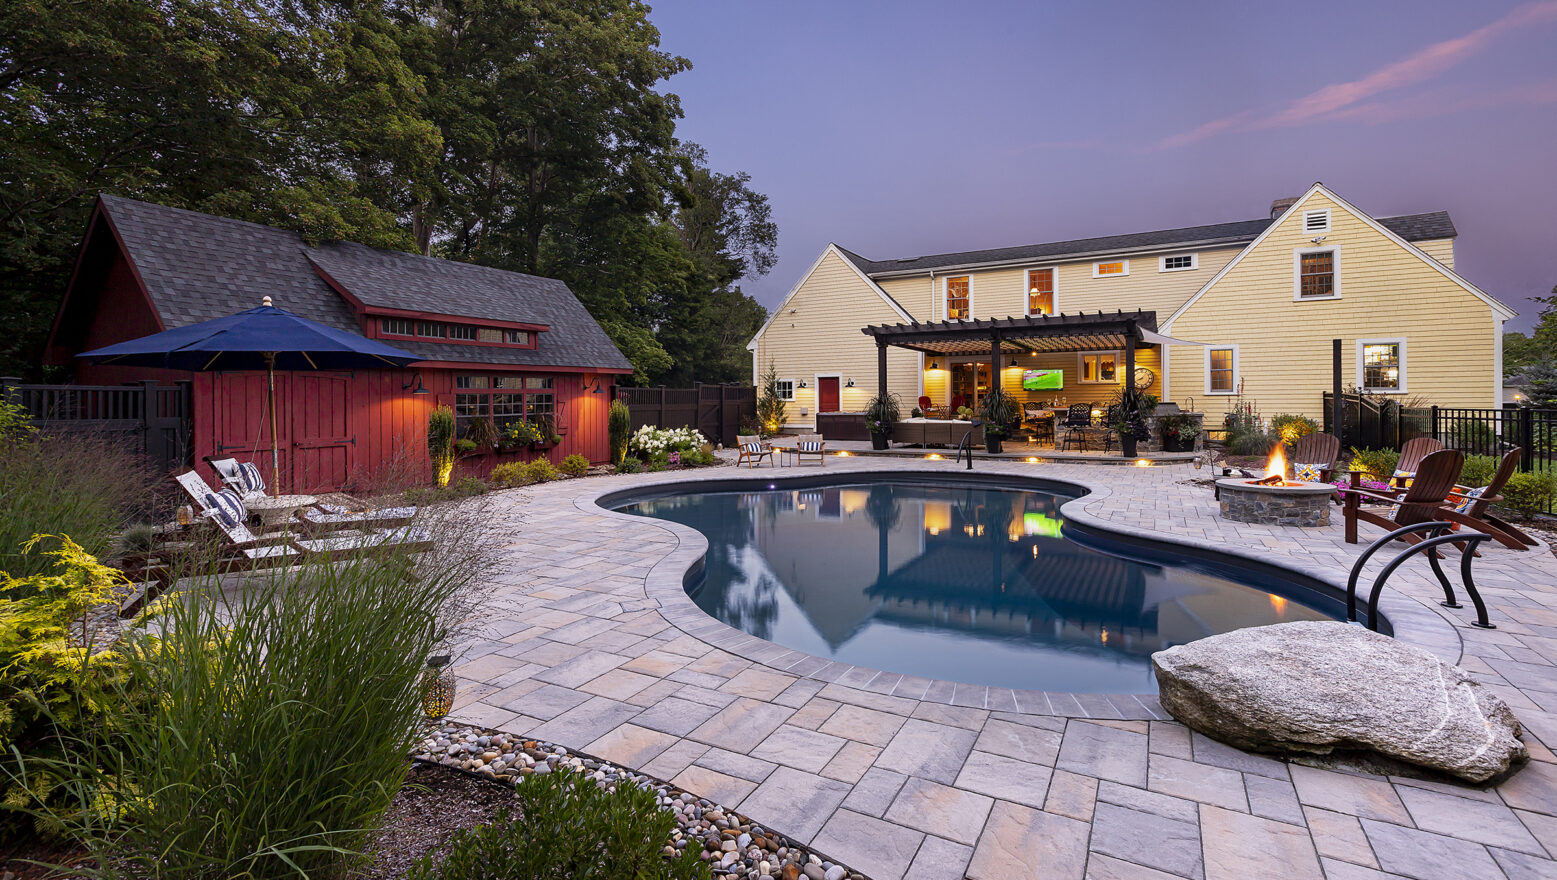 Residential Landscape Design & Build Project in Stow Massachusetts